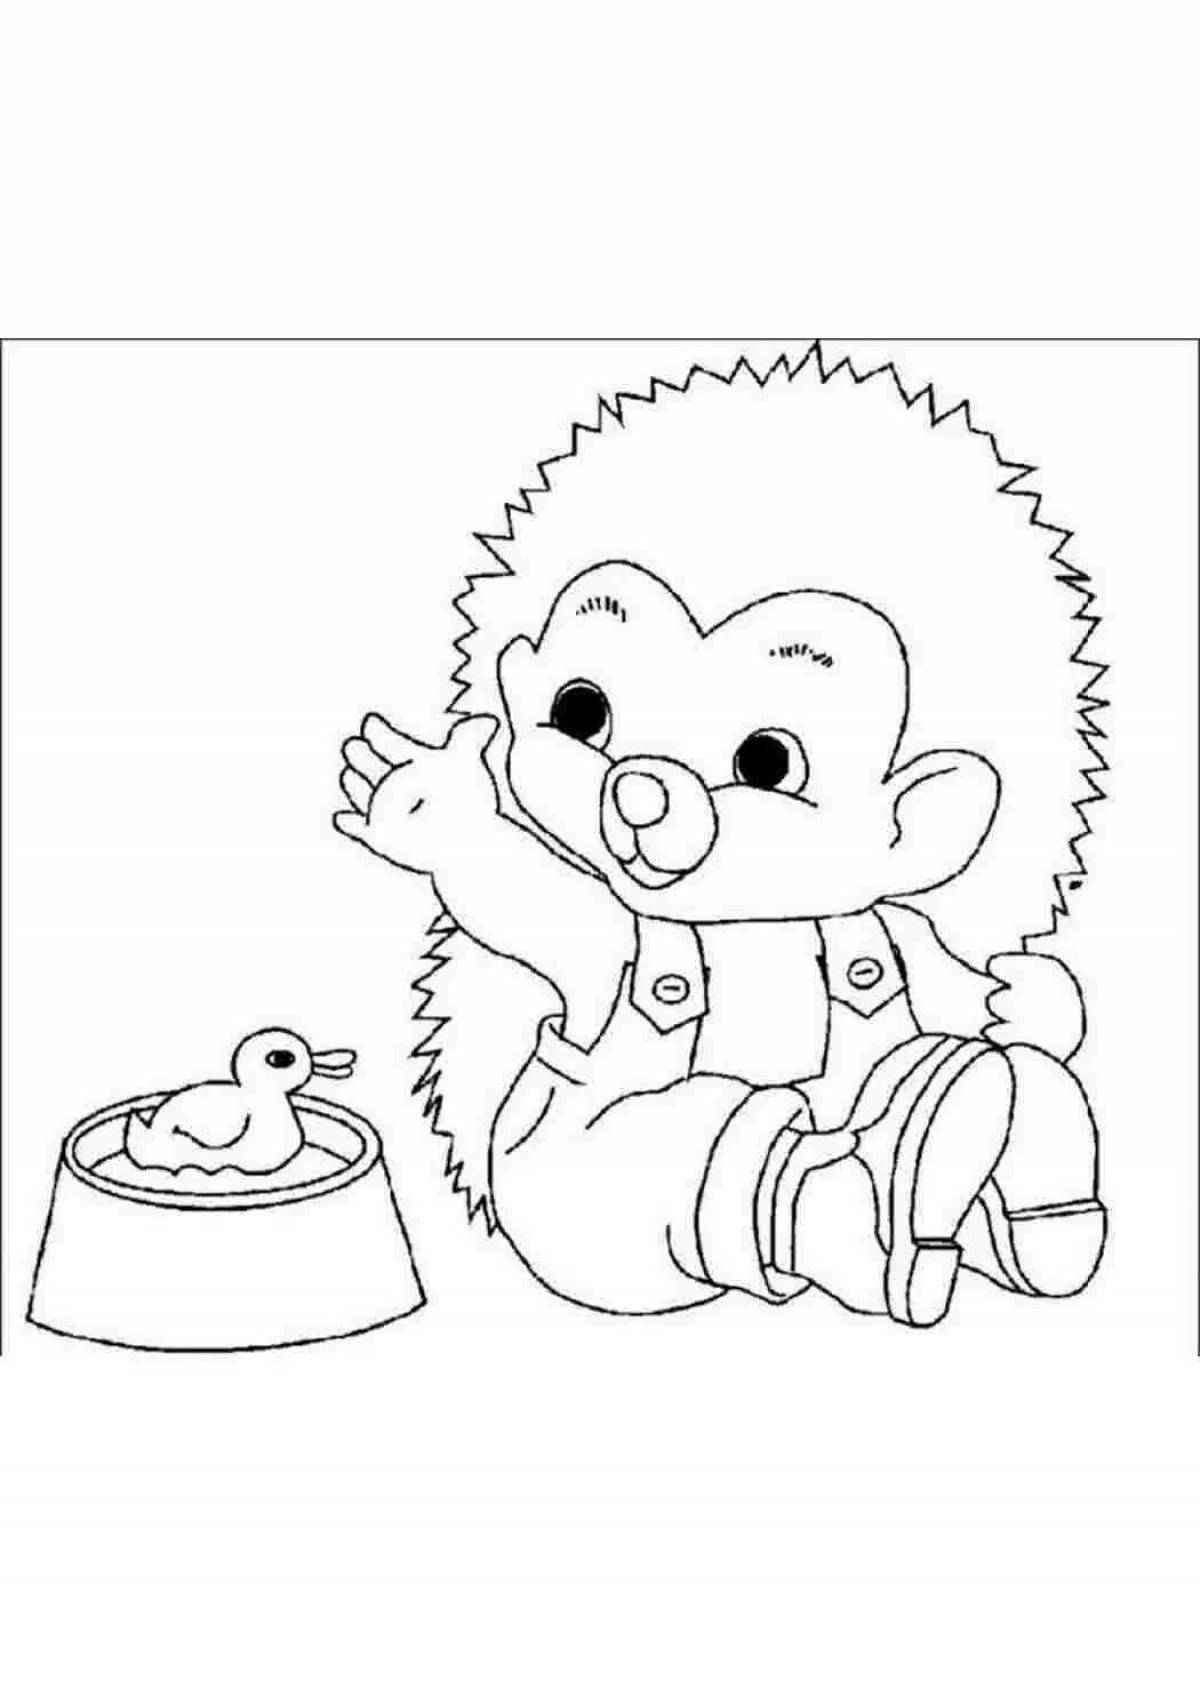 Fun coloring hedgehog for the little ones